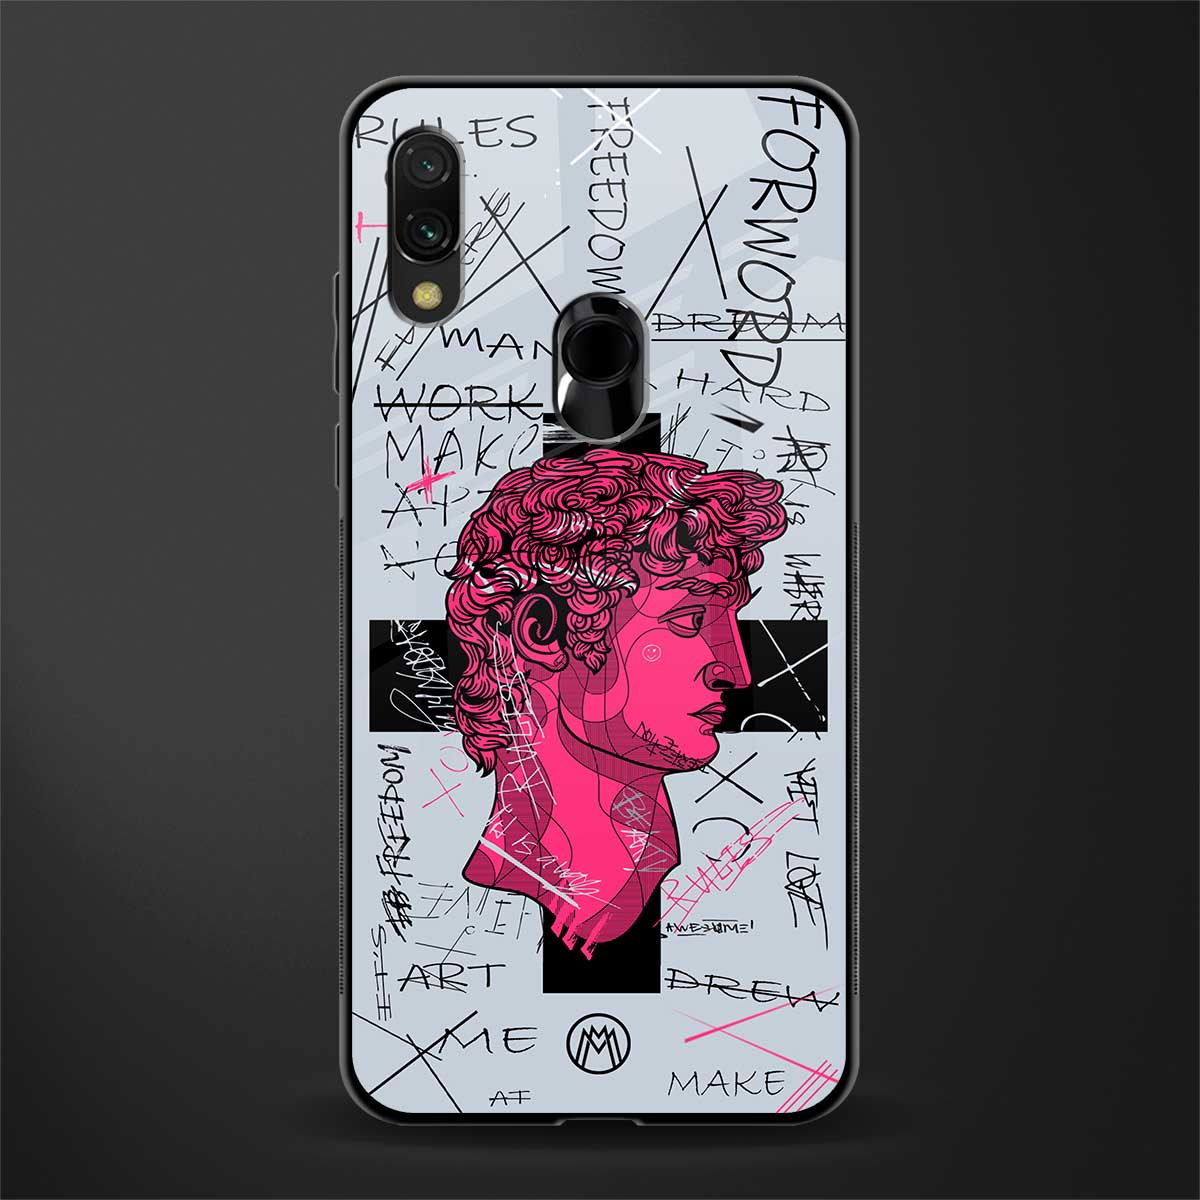 lost in reality david glass case for redmi note 7 pro image